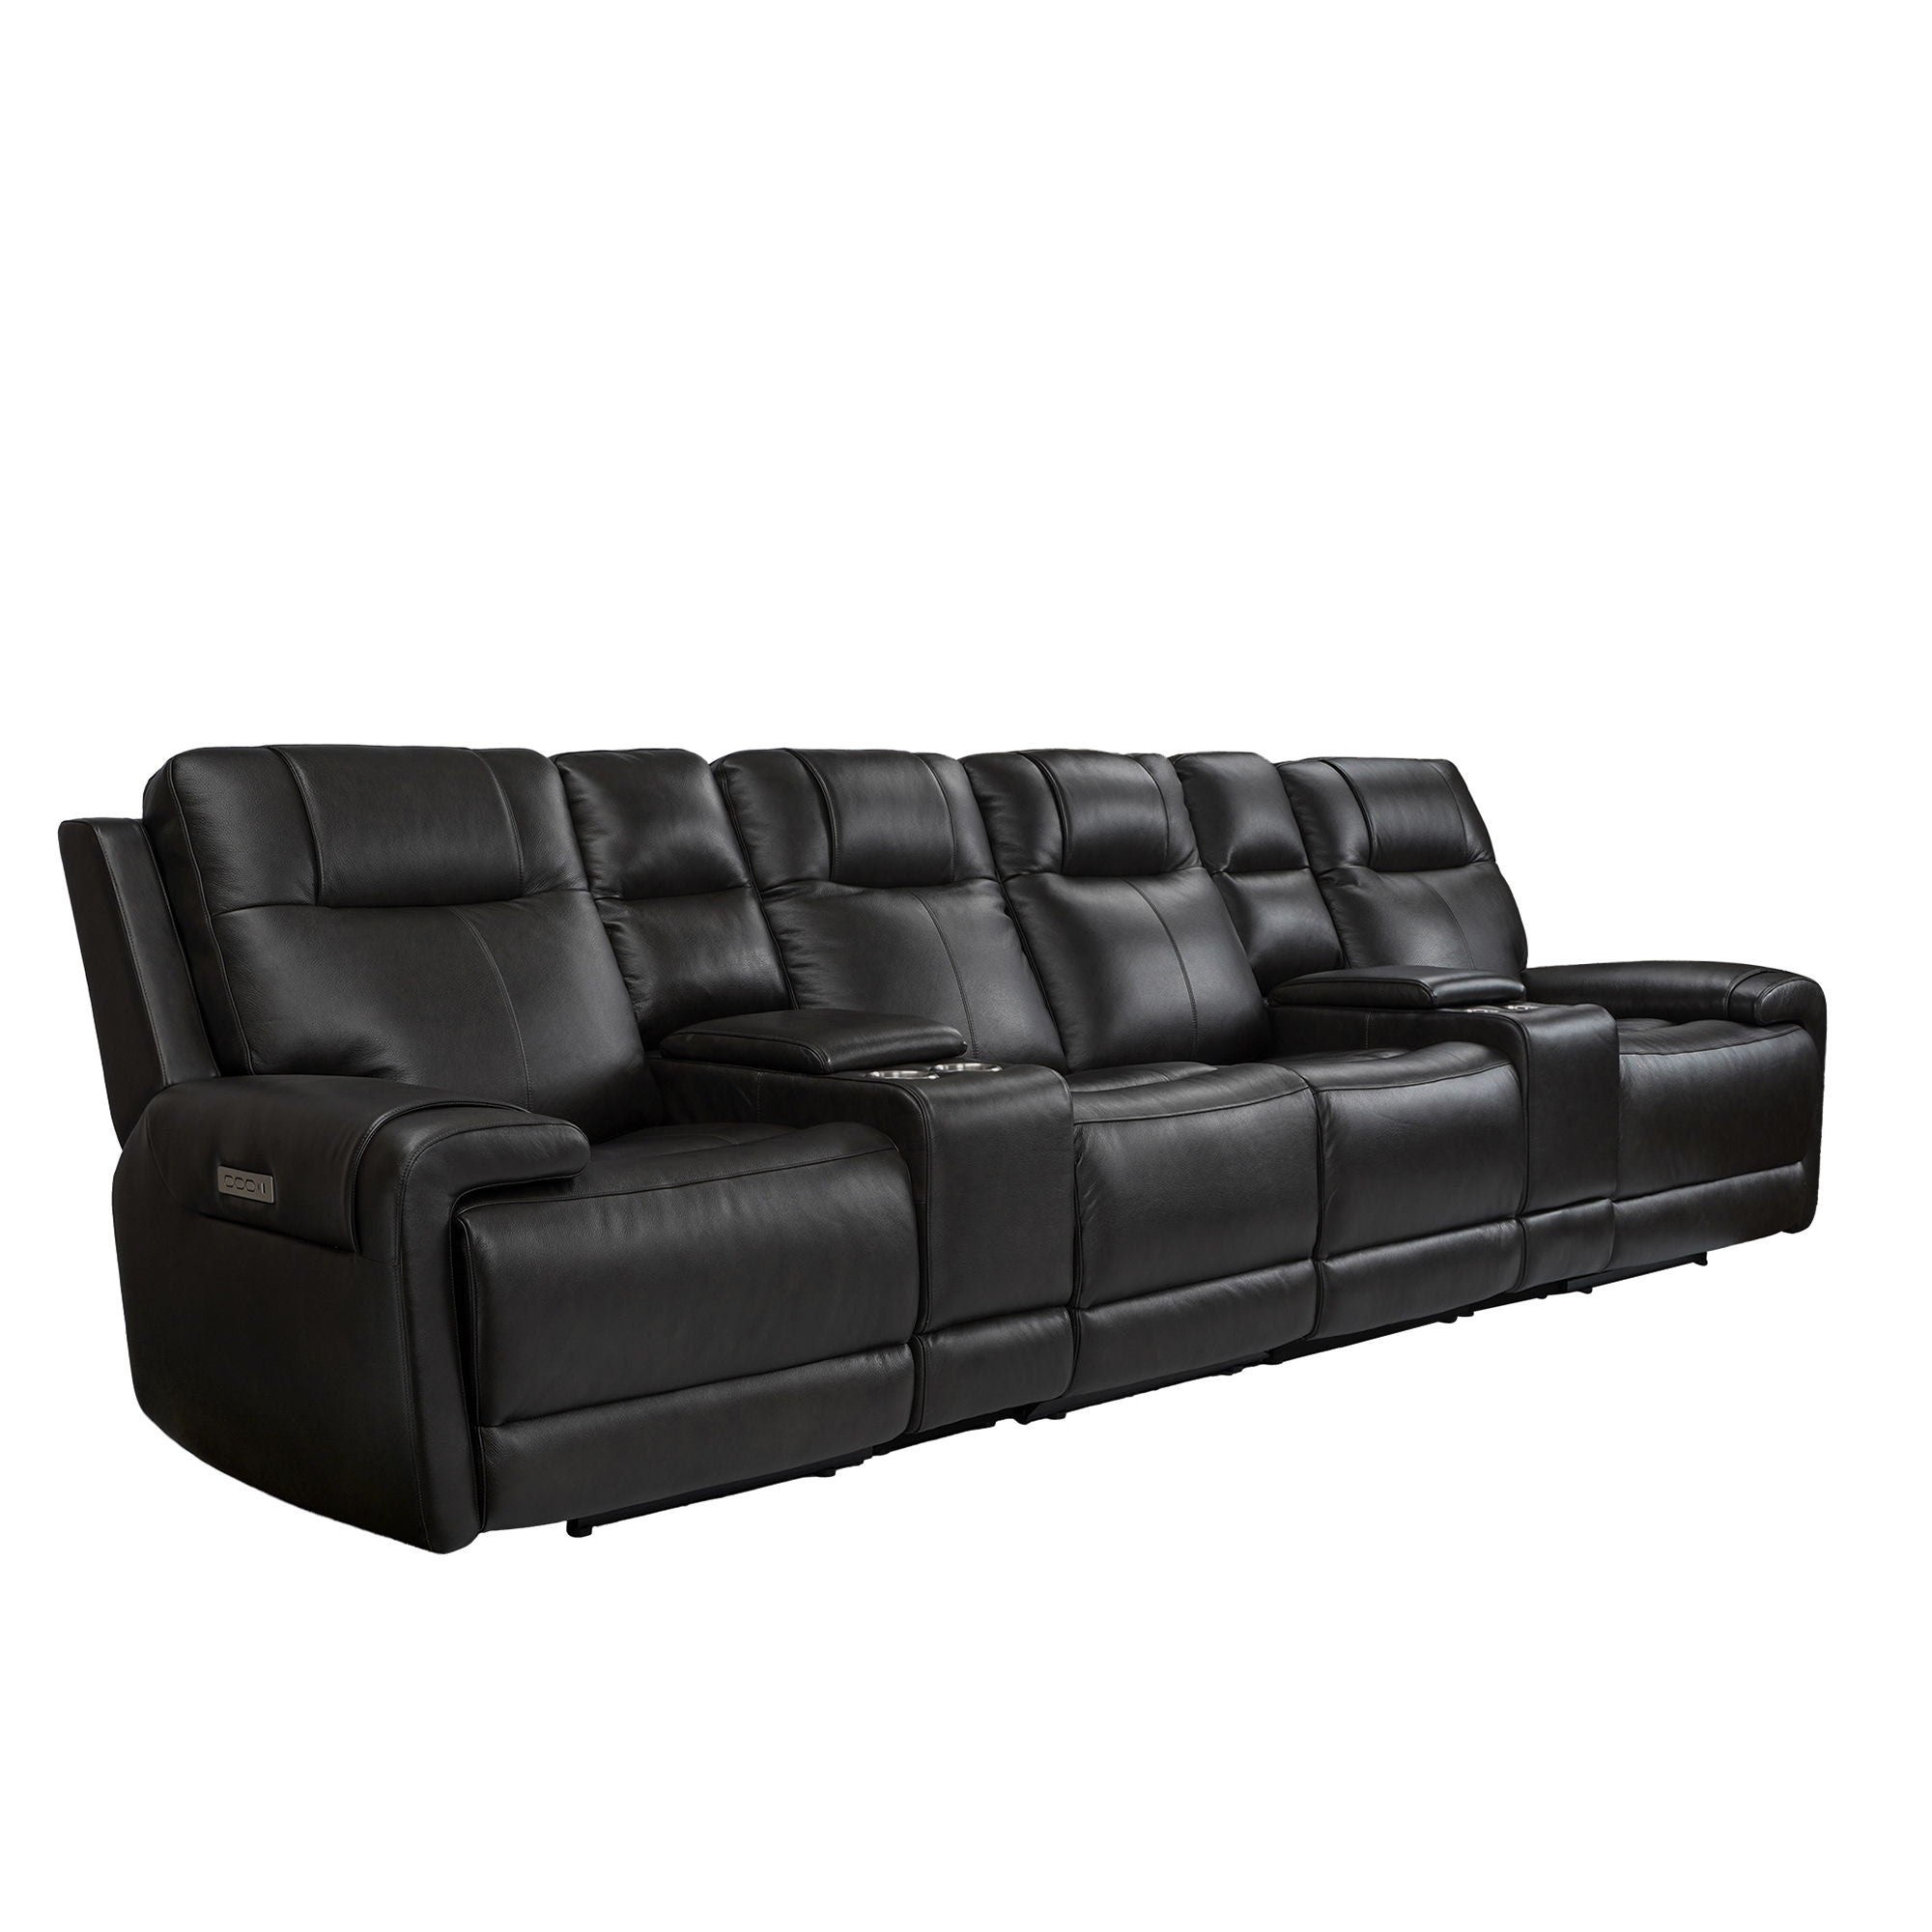 Trevor Triple 4 Seats Power Sofa With 2 Console, Genuine Leather, Lumbar Support, Adjustable Headrest, USB & Type C Charge Port, Middle Armless Chair With Triple Power Control